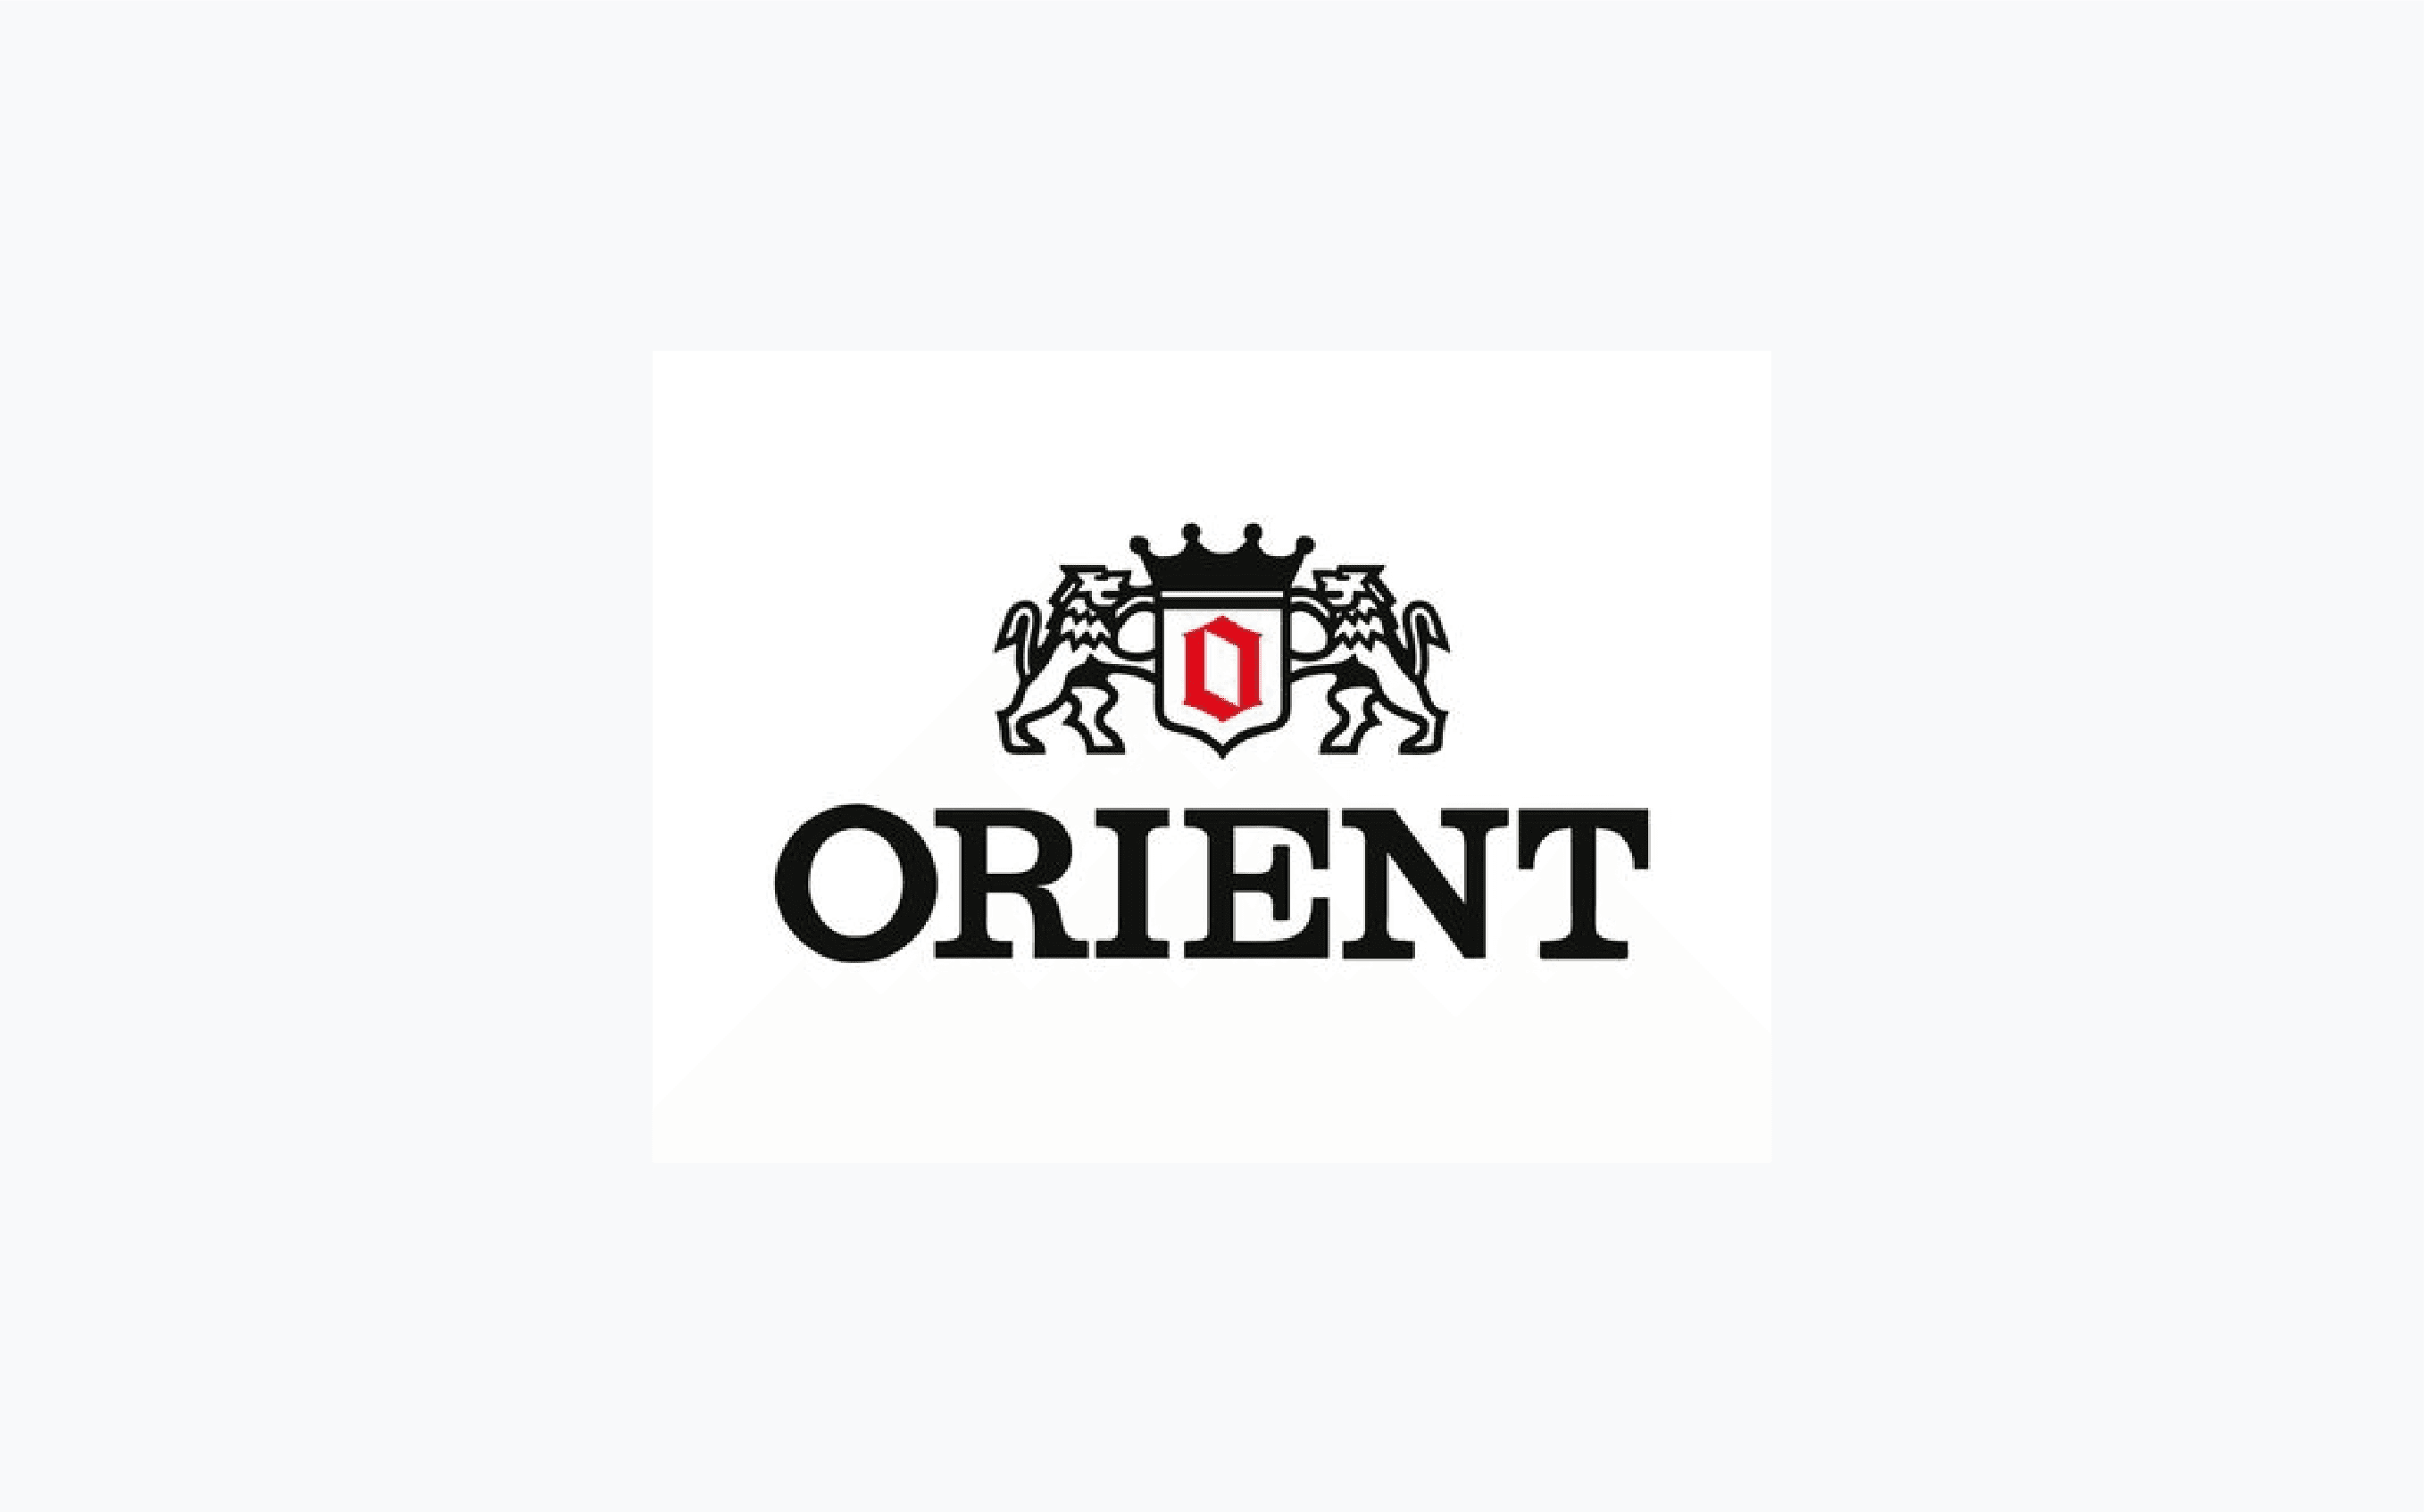 Orient category